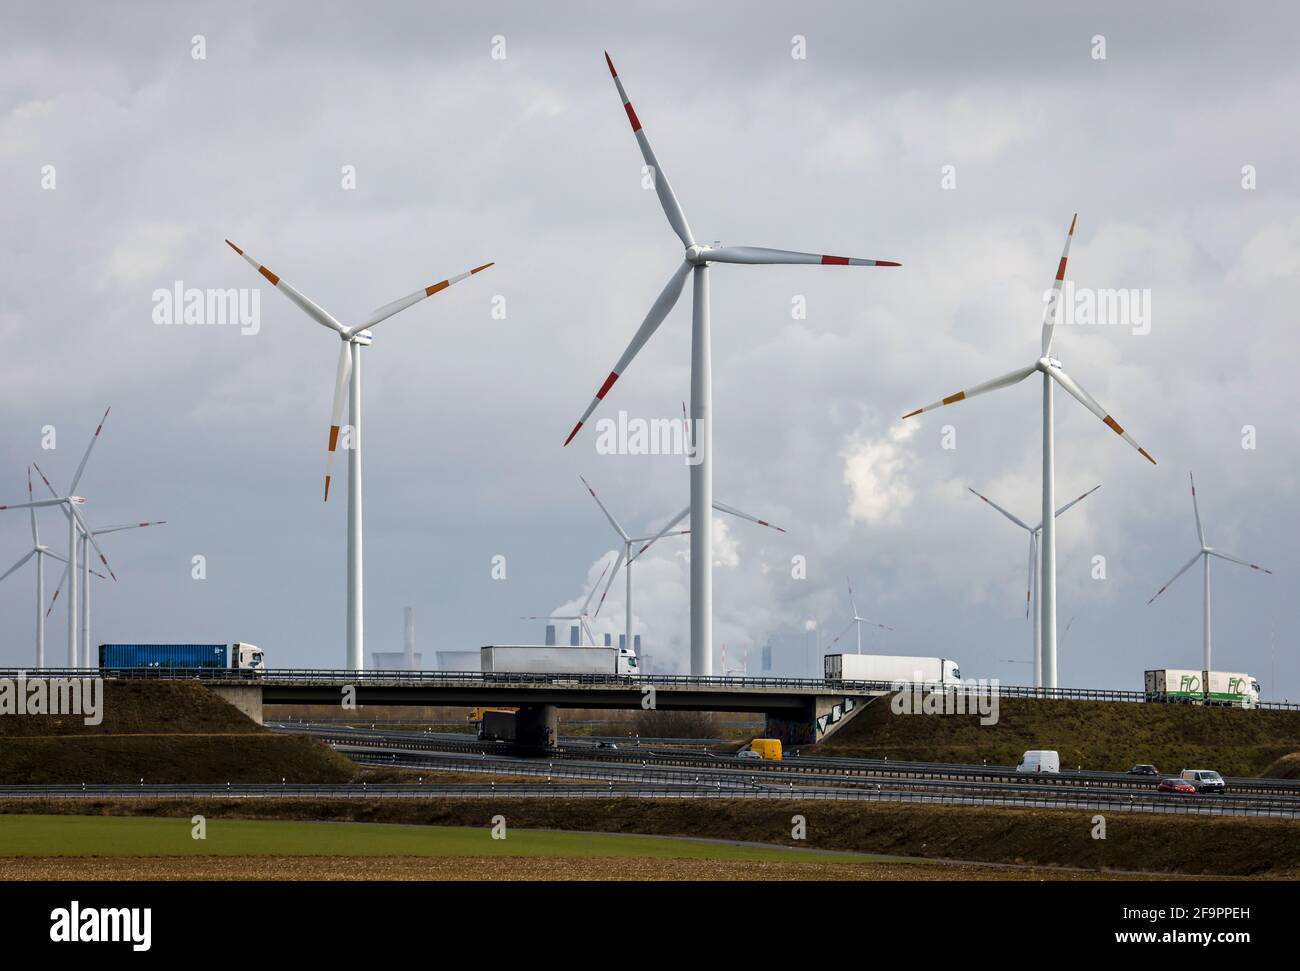 16.03.2021, Grevenbroich, North Rhine-Westphalia, Germany - Truck on freeway and wind farm in front of RWE power plant Neurath, lignite-fired power pl Stock Photo